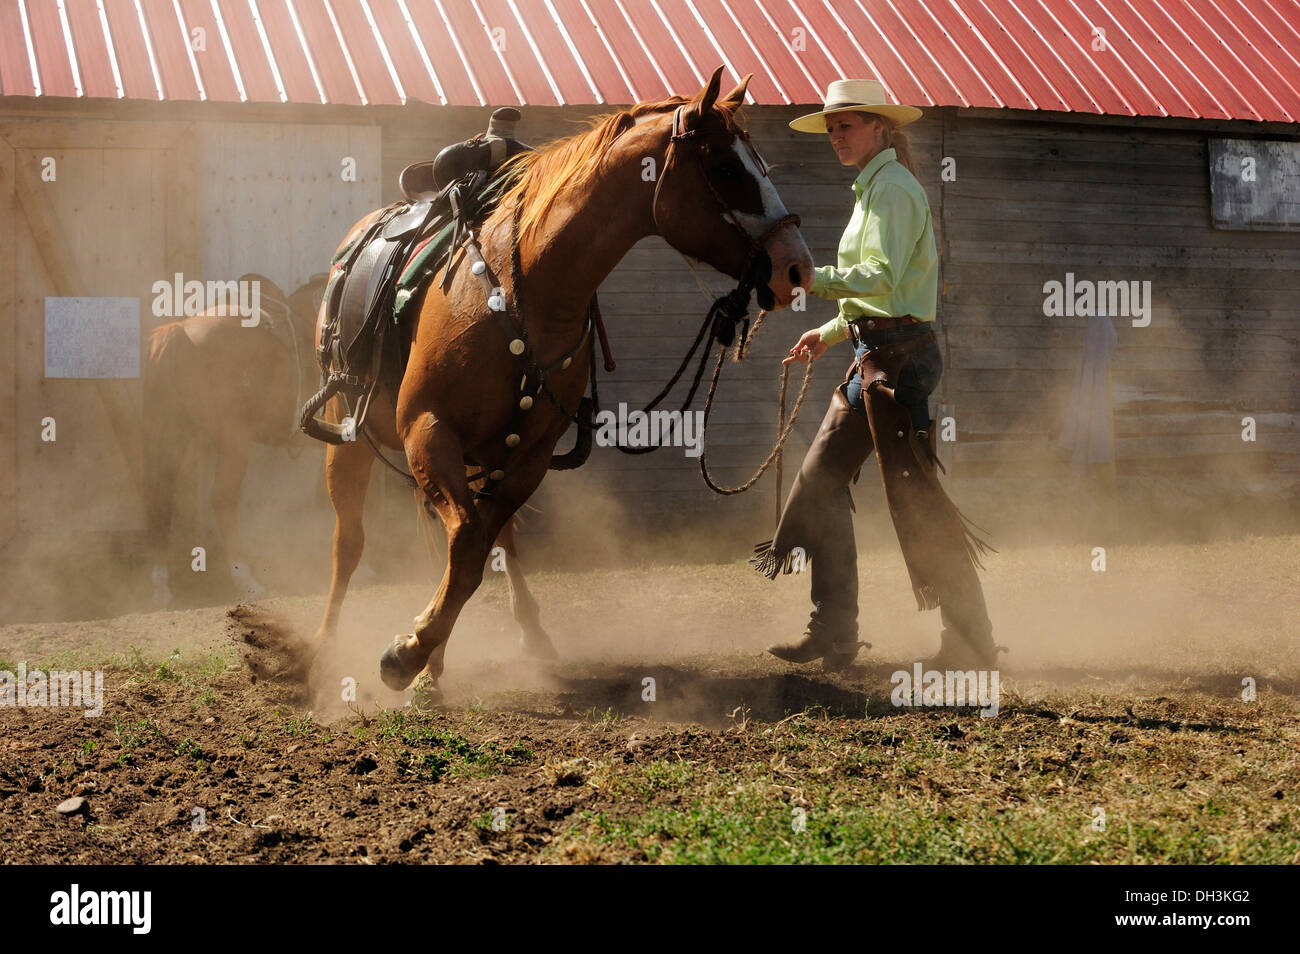 Bucking horse being held on the reins by a cowgirl in a paddock on the prairie, Saskatchewan Province, Canada Stock Photo